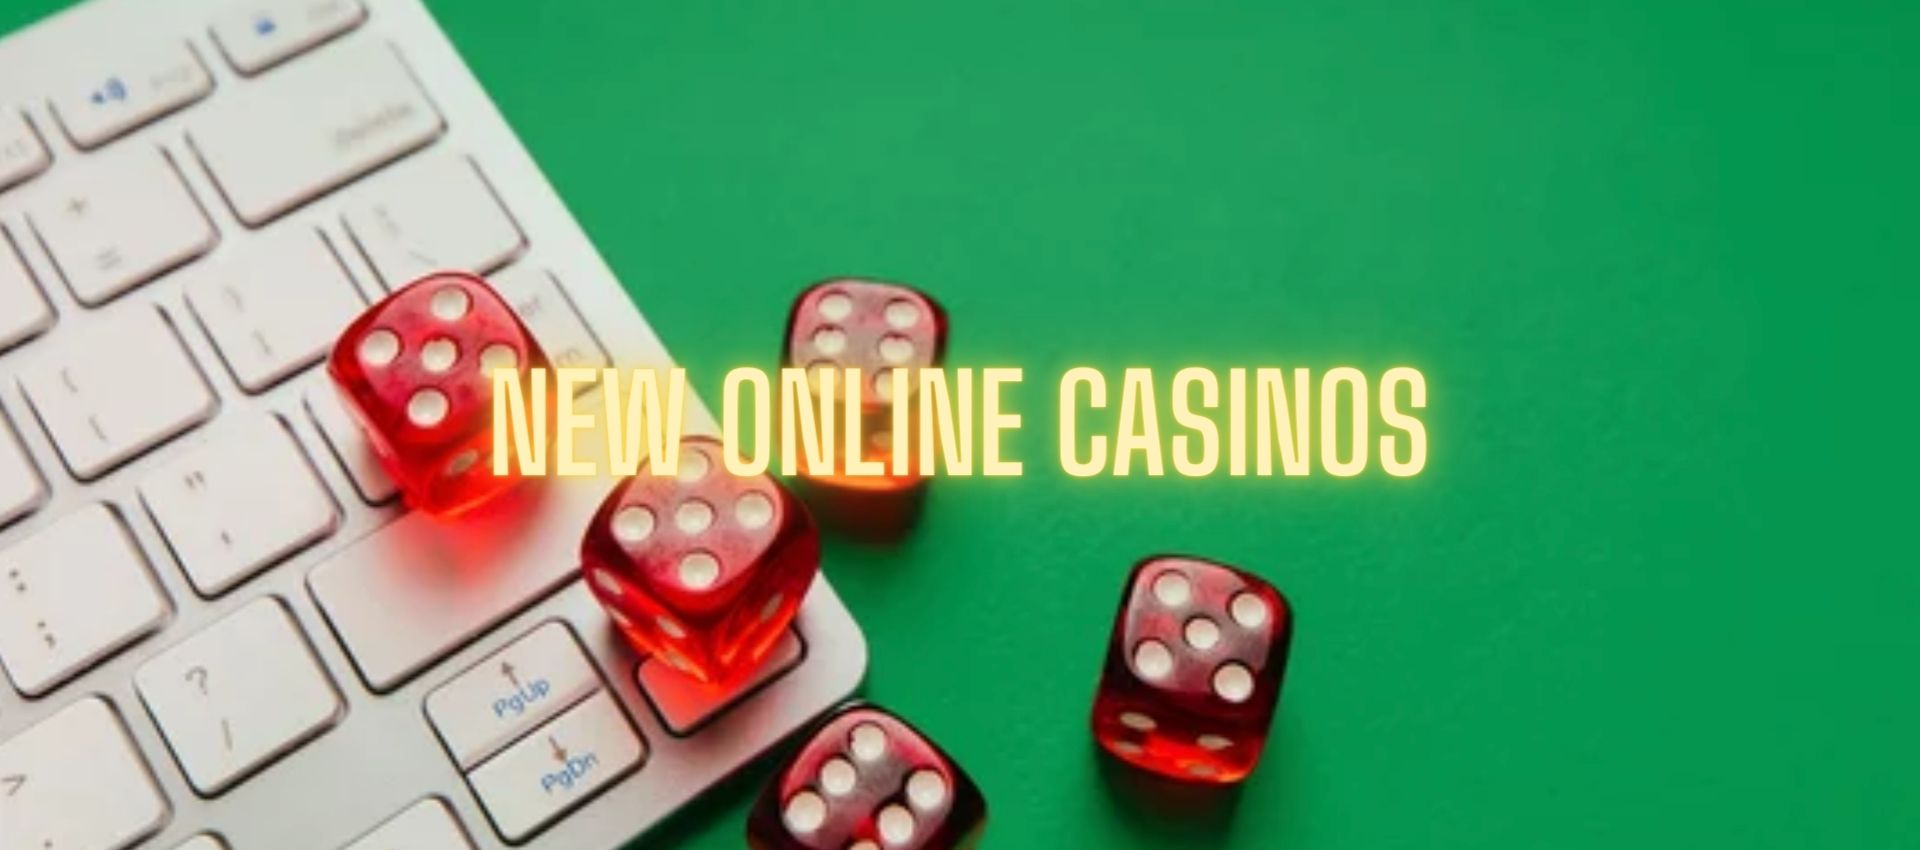 Learn about the new online casinos